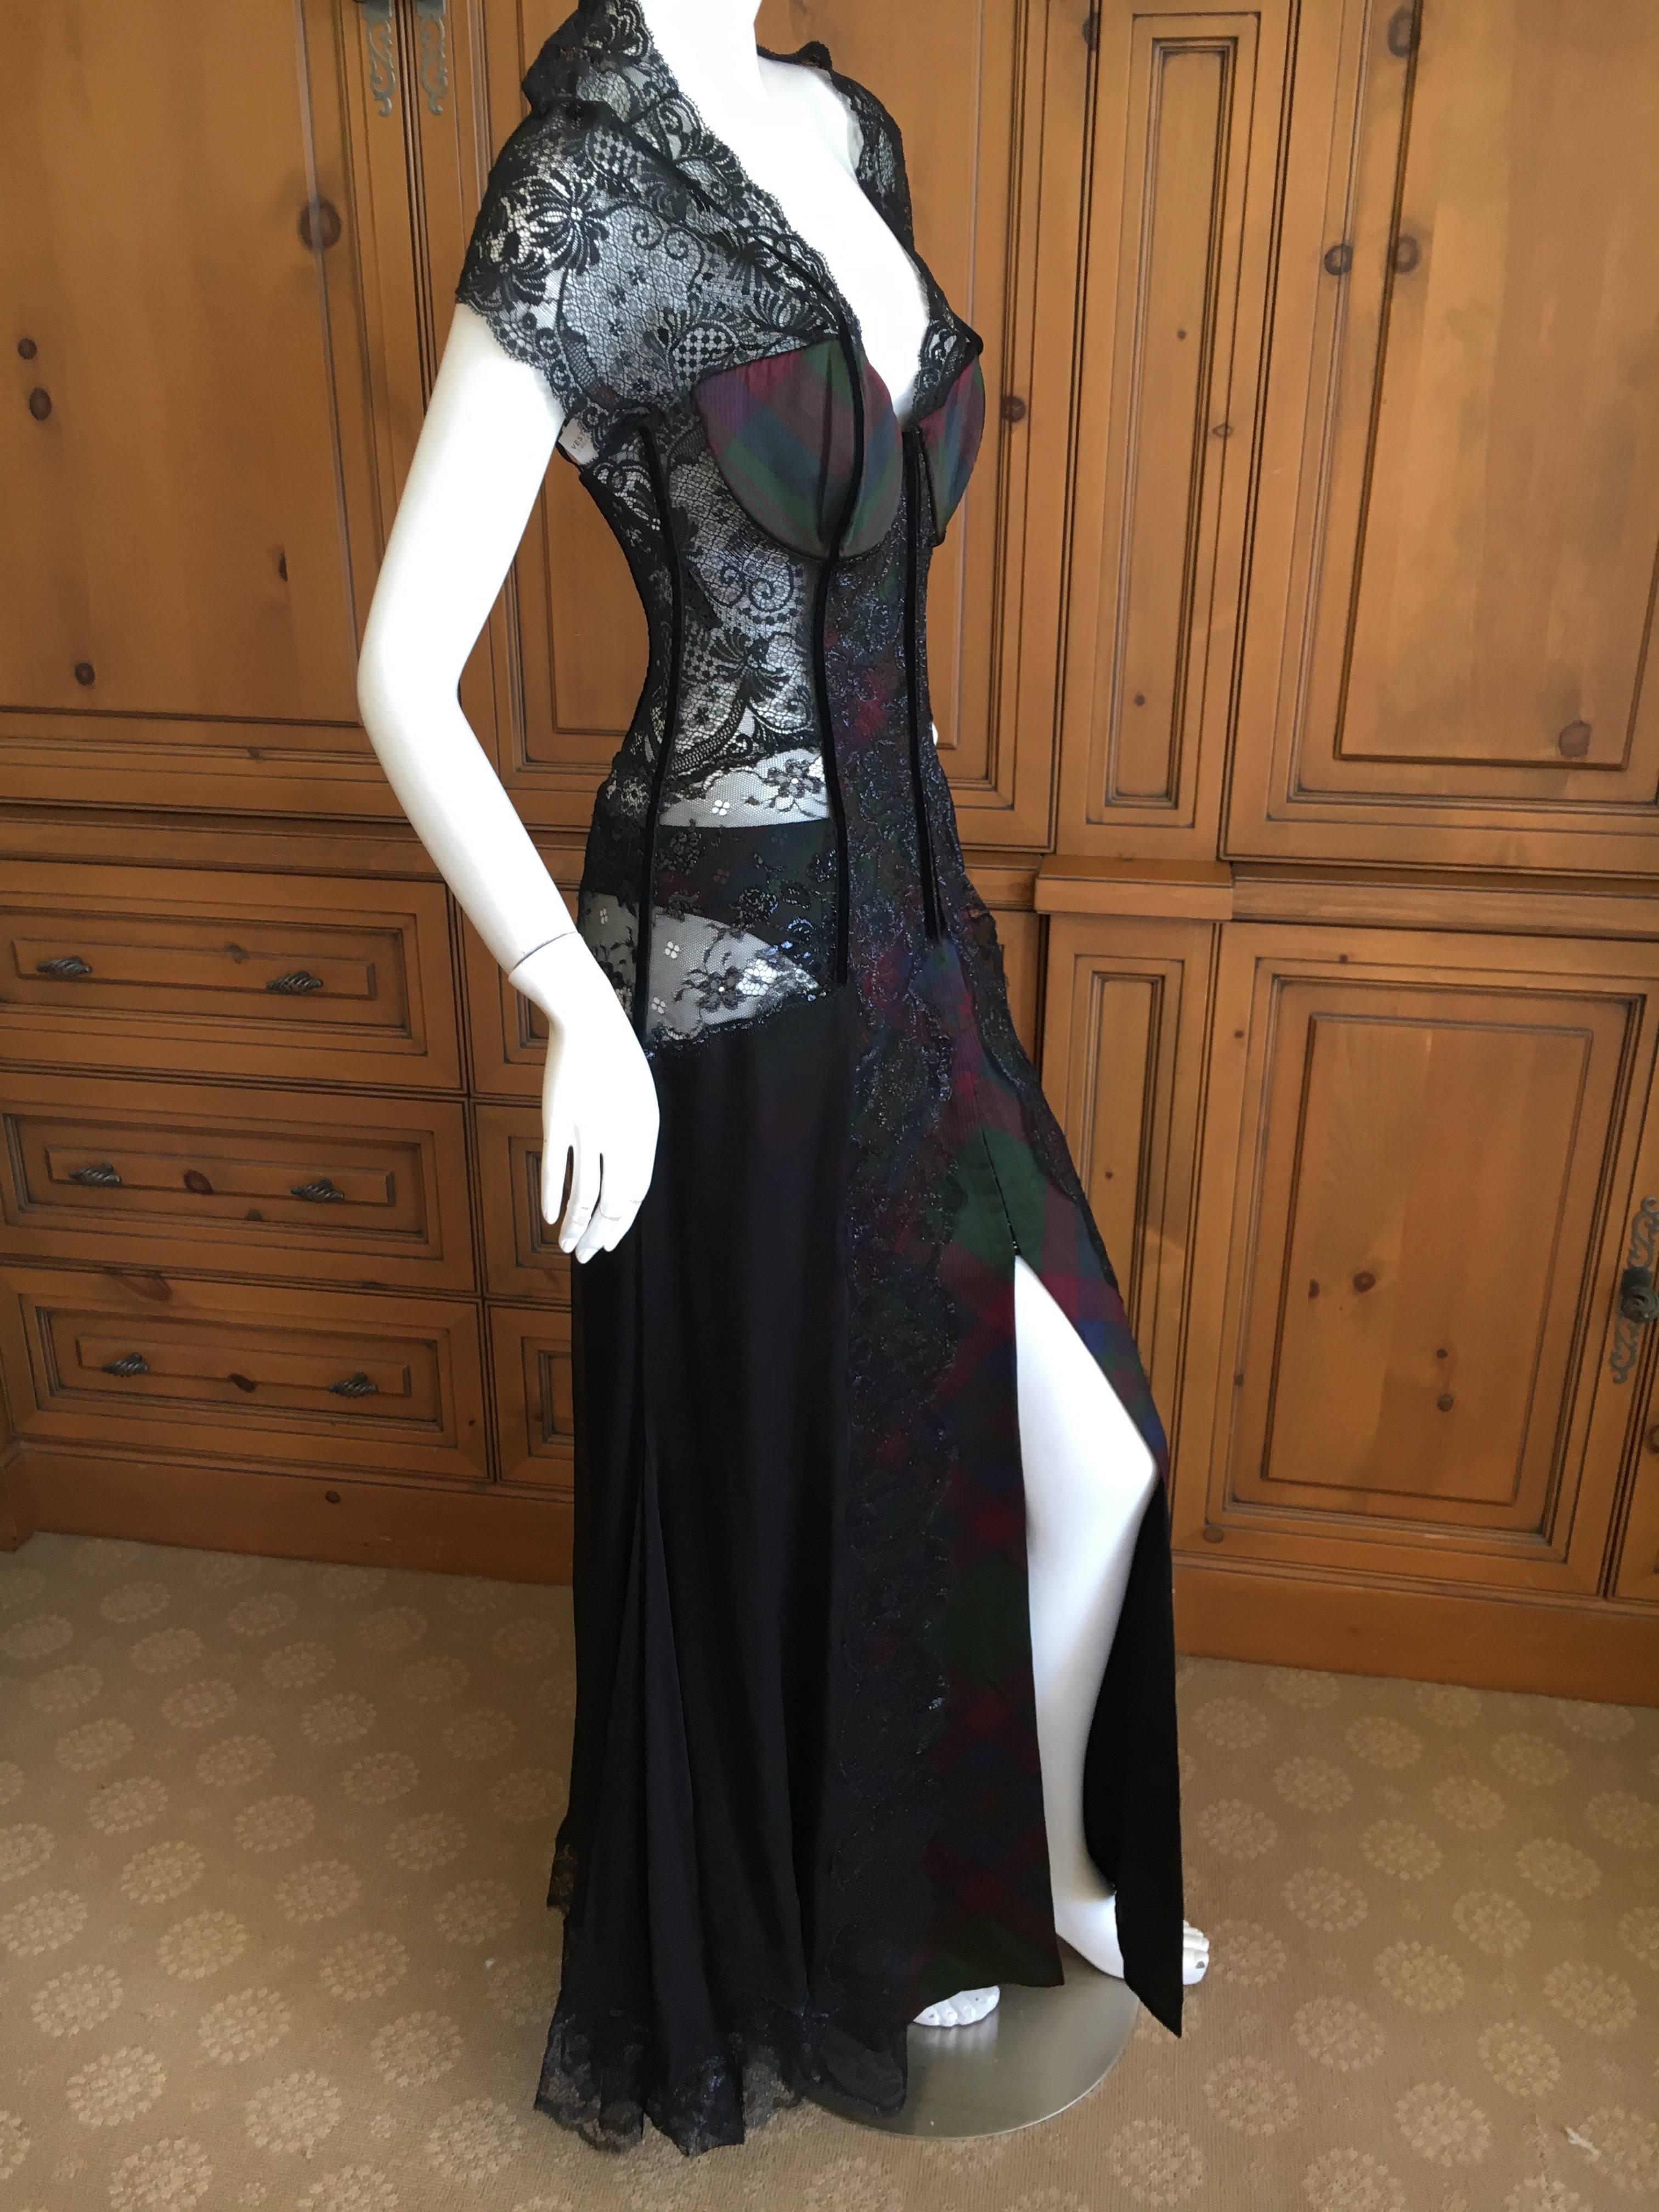 Christian Dior Gianfranco Ferre Final Collection Plaid Lace Evening Dress, 1996  For Sale 3